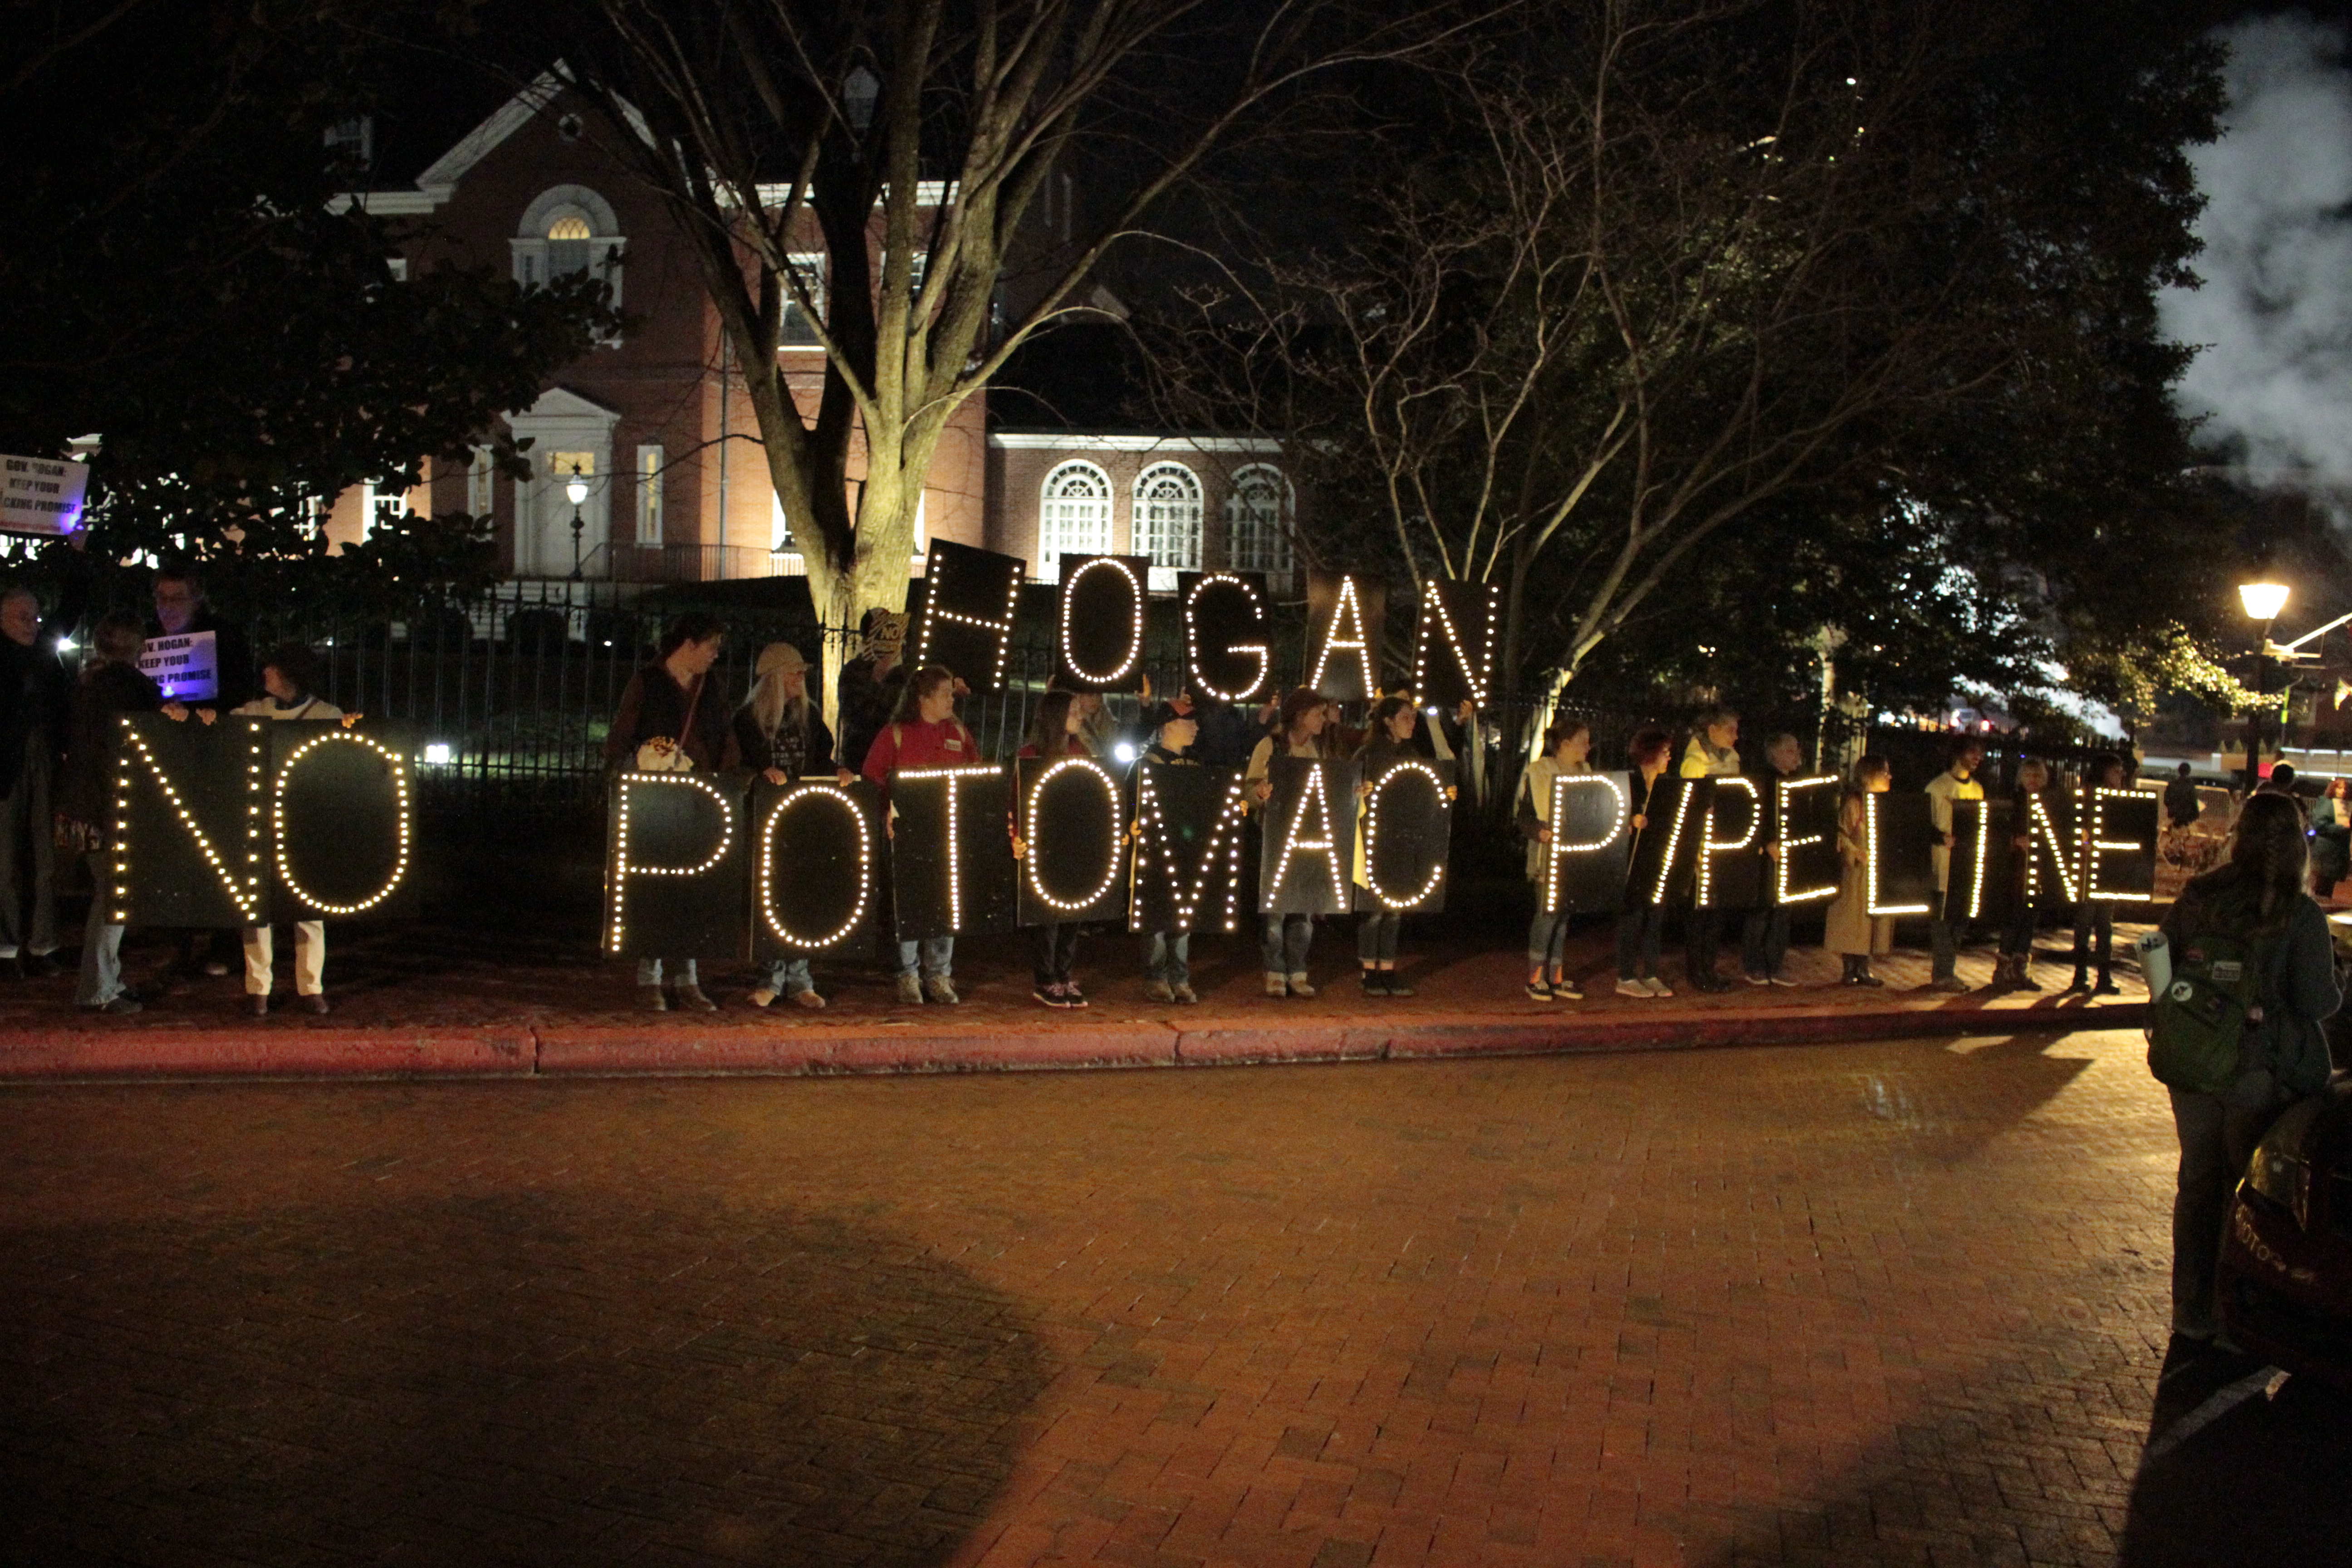 Group holding signs reading "Hogan No Potomac Pipline" outside Governor's Mansion